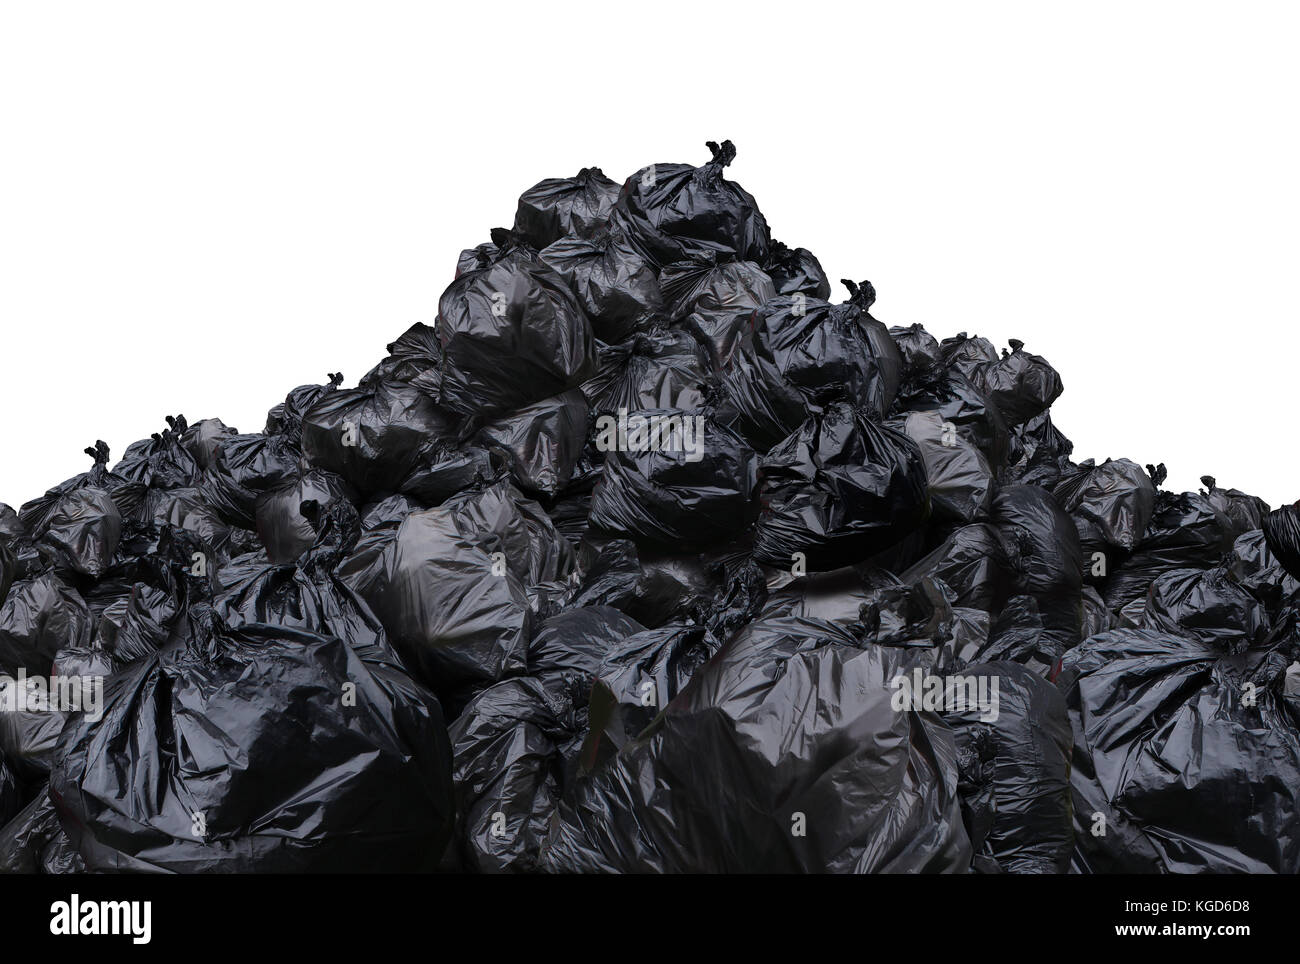 Garbage dump isolated on a white background as a pile of black plastic trash bags. Stock Photo